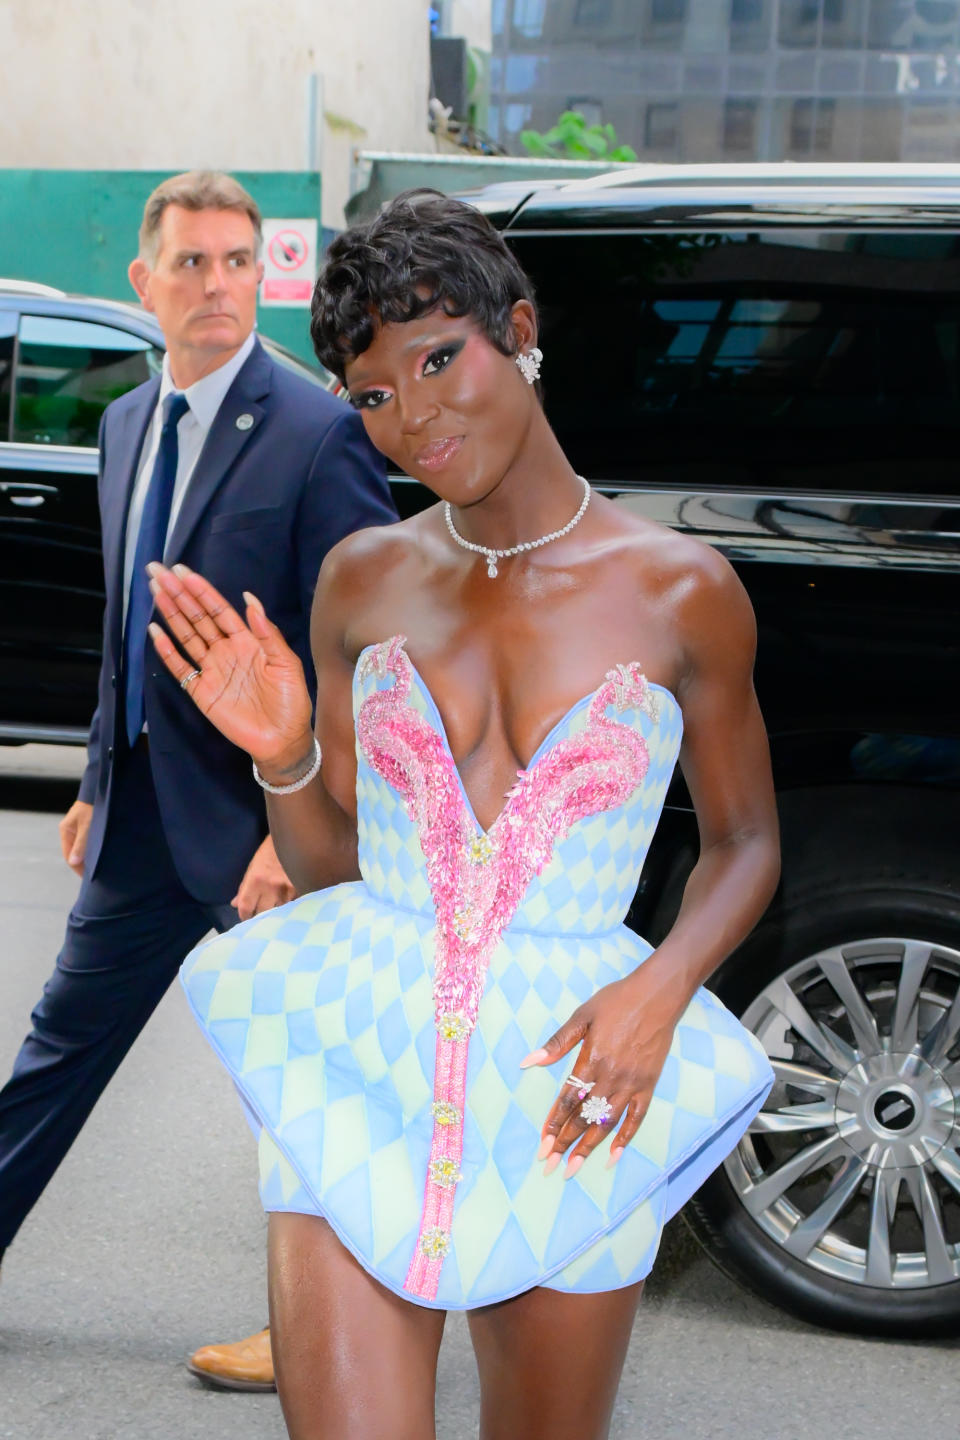 Jodie Turner-Smith is walking, waving, wearing a strapless, structured dress with a checkered pattern. A man in a suit is seen in the background